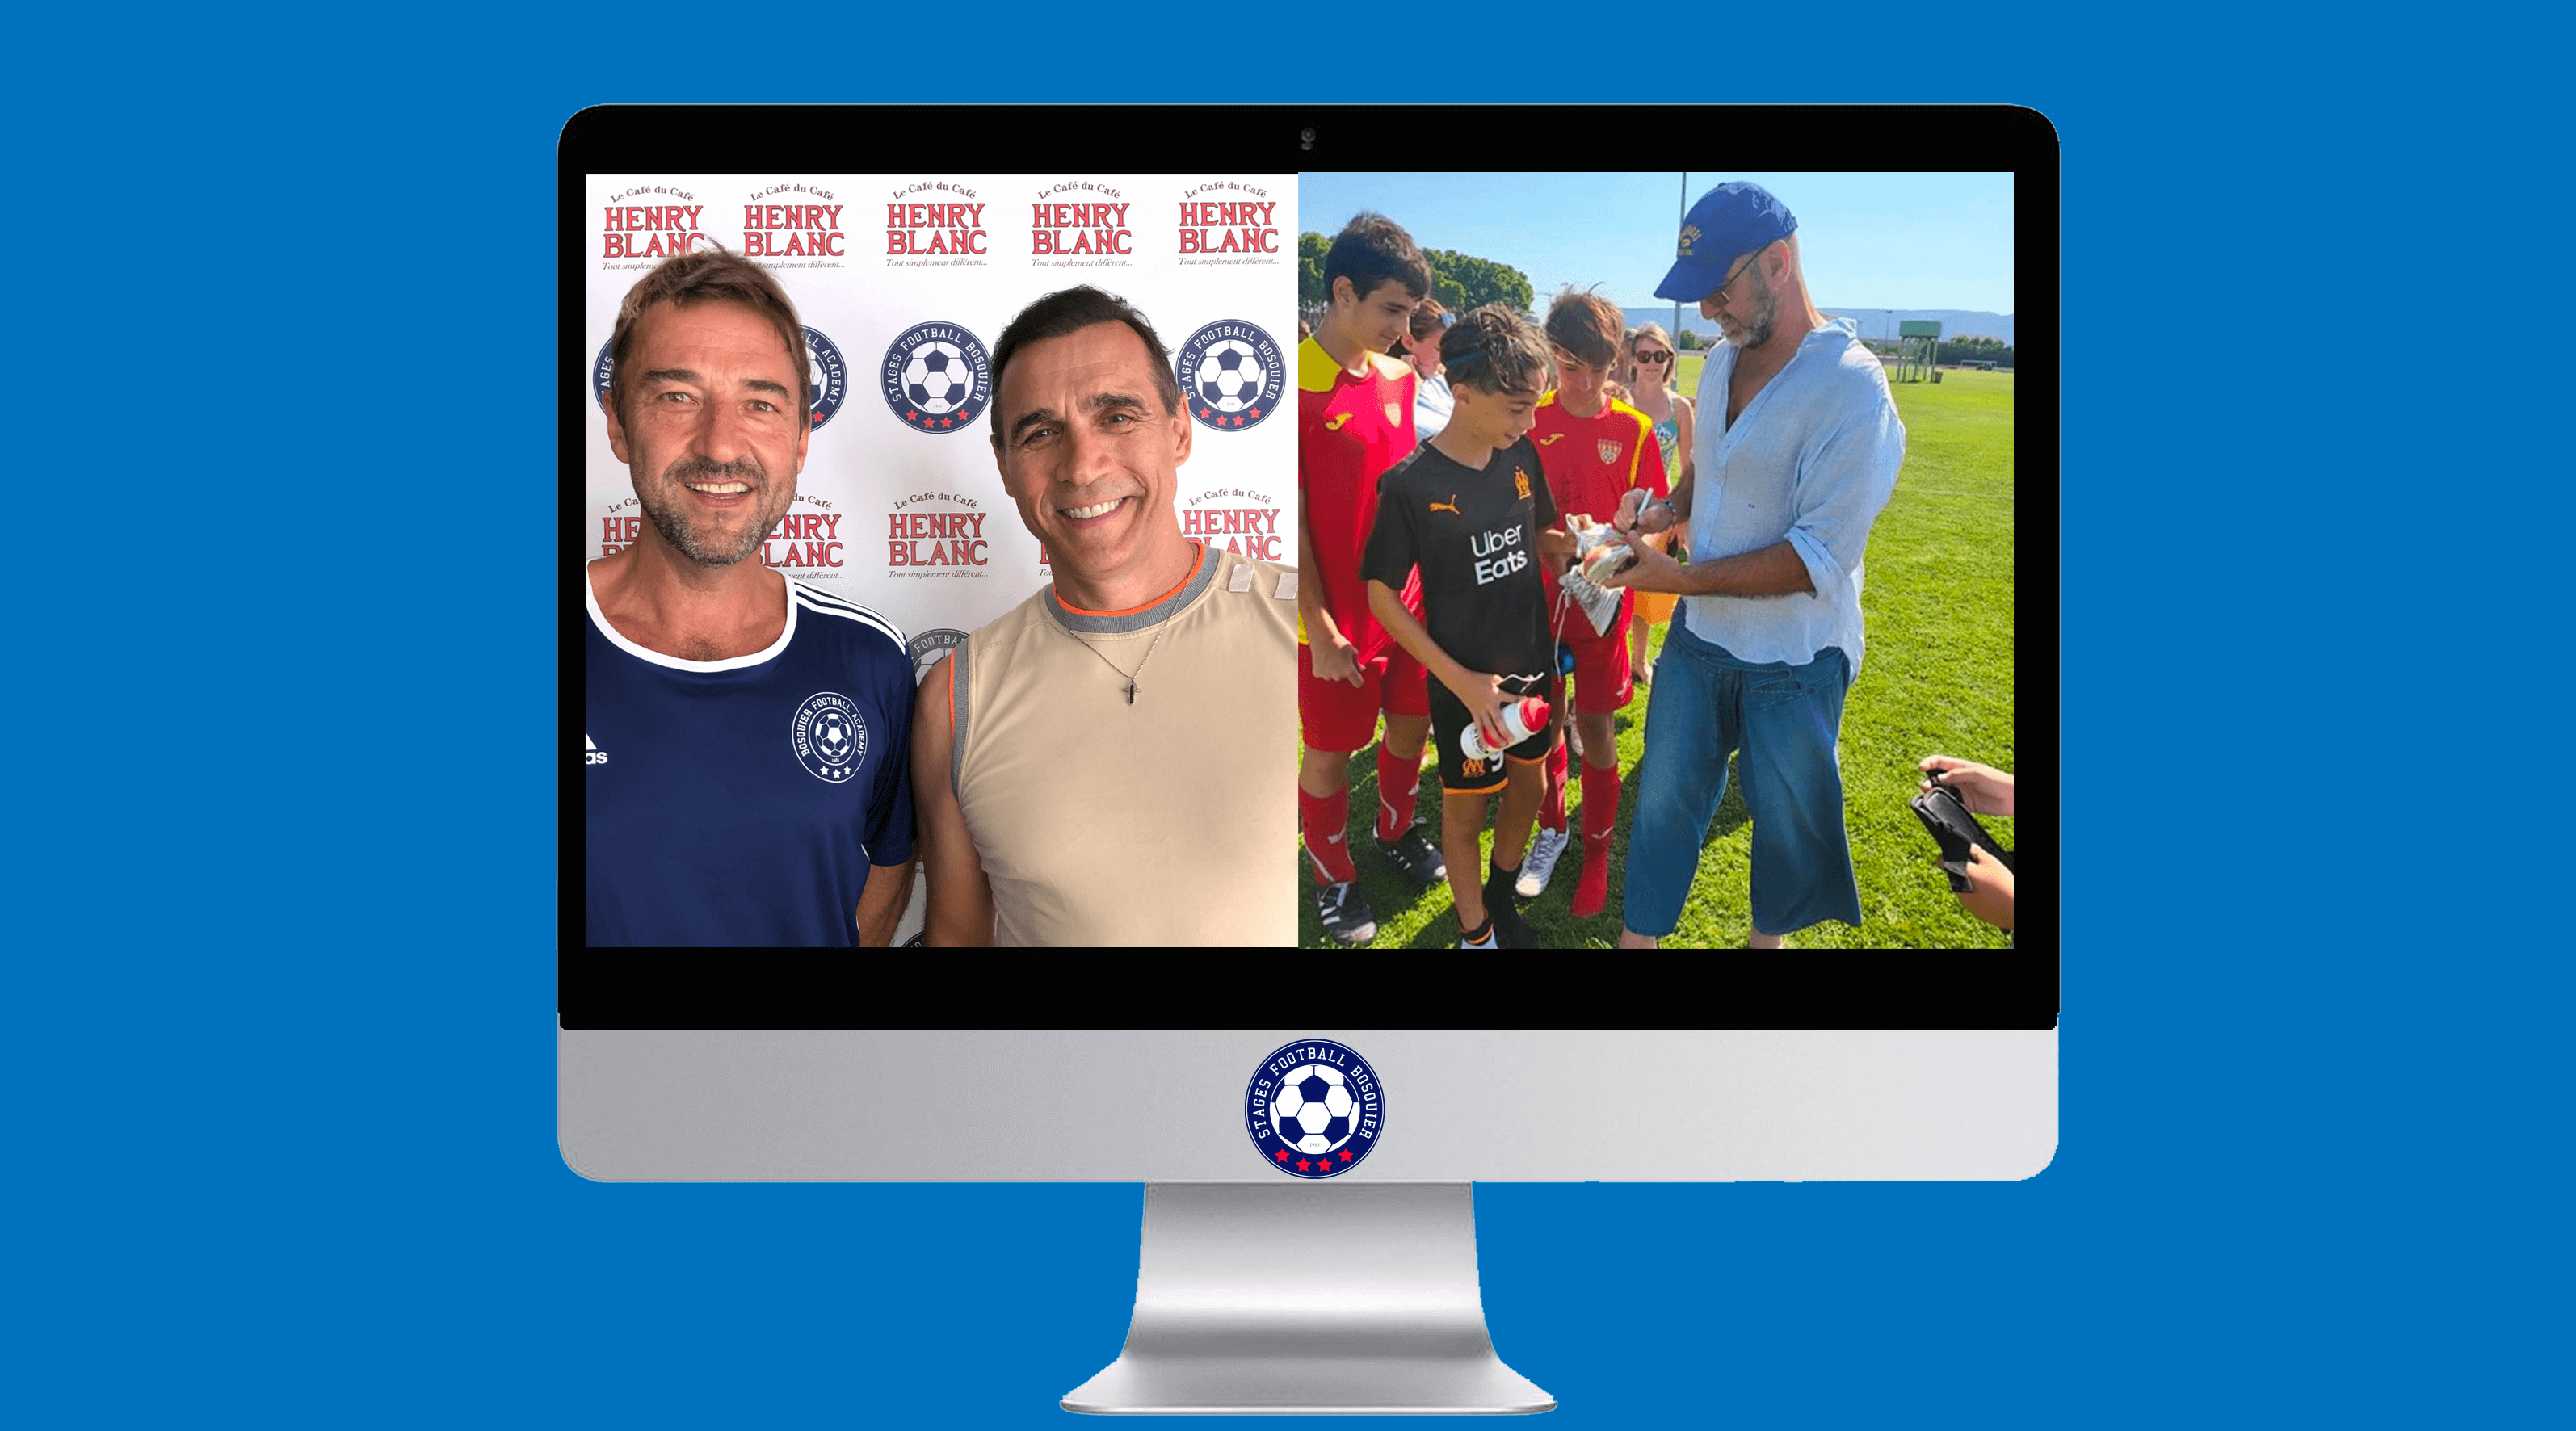 Adrian Paul, star of the Highlander series and Eric Cantona, elected player of the century at Manchester United, visited us at the Bosquier Football Academy.